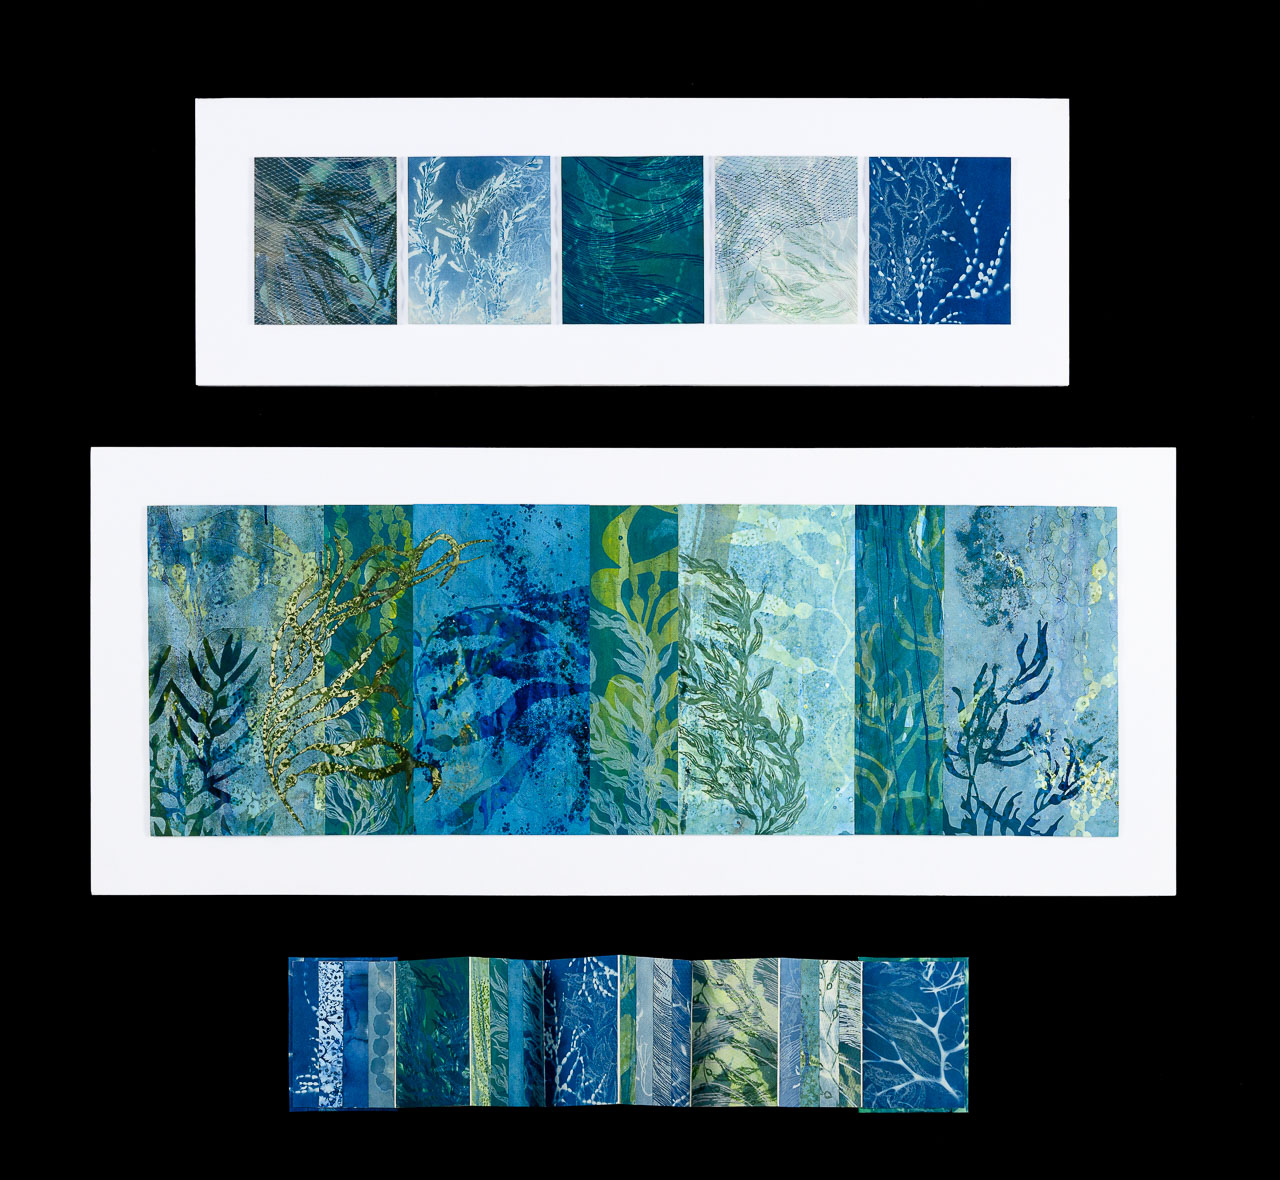 Multiple prints in shades of green and blue depicting seaweed.